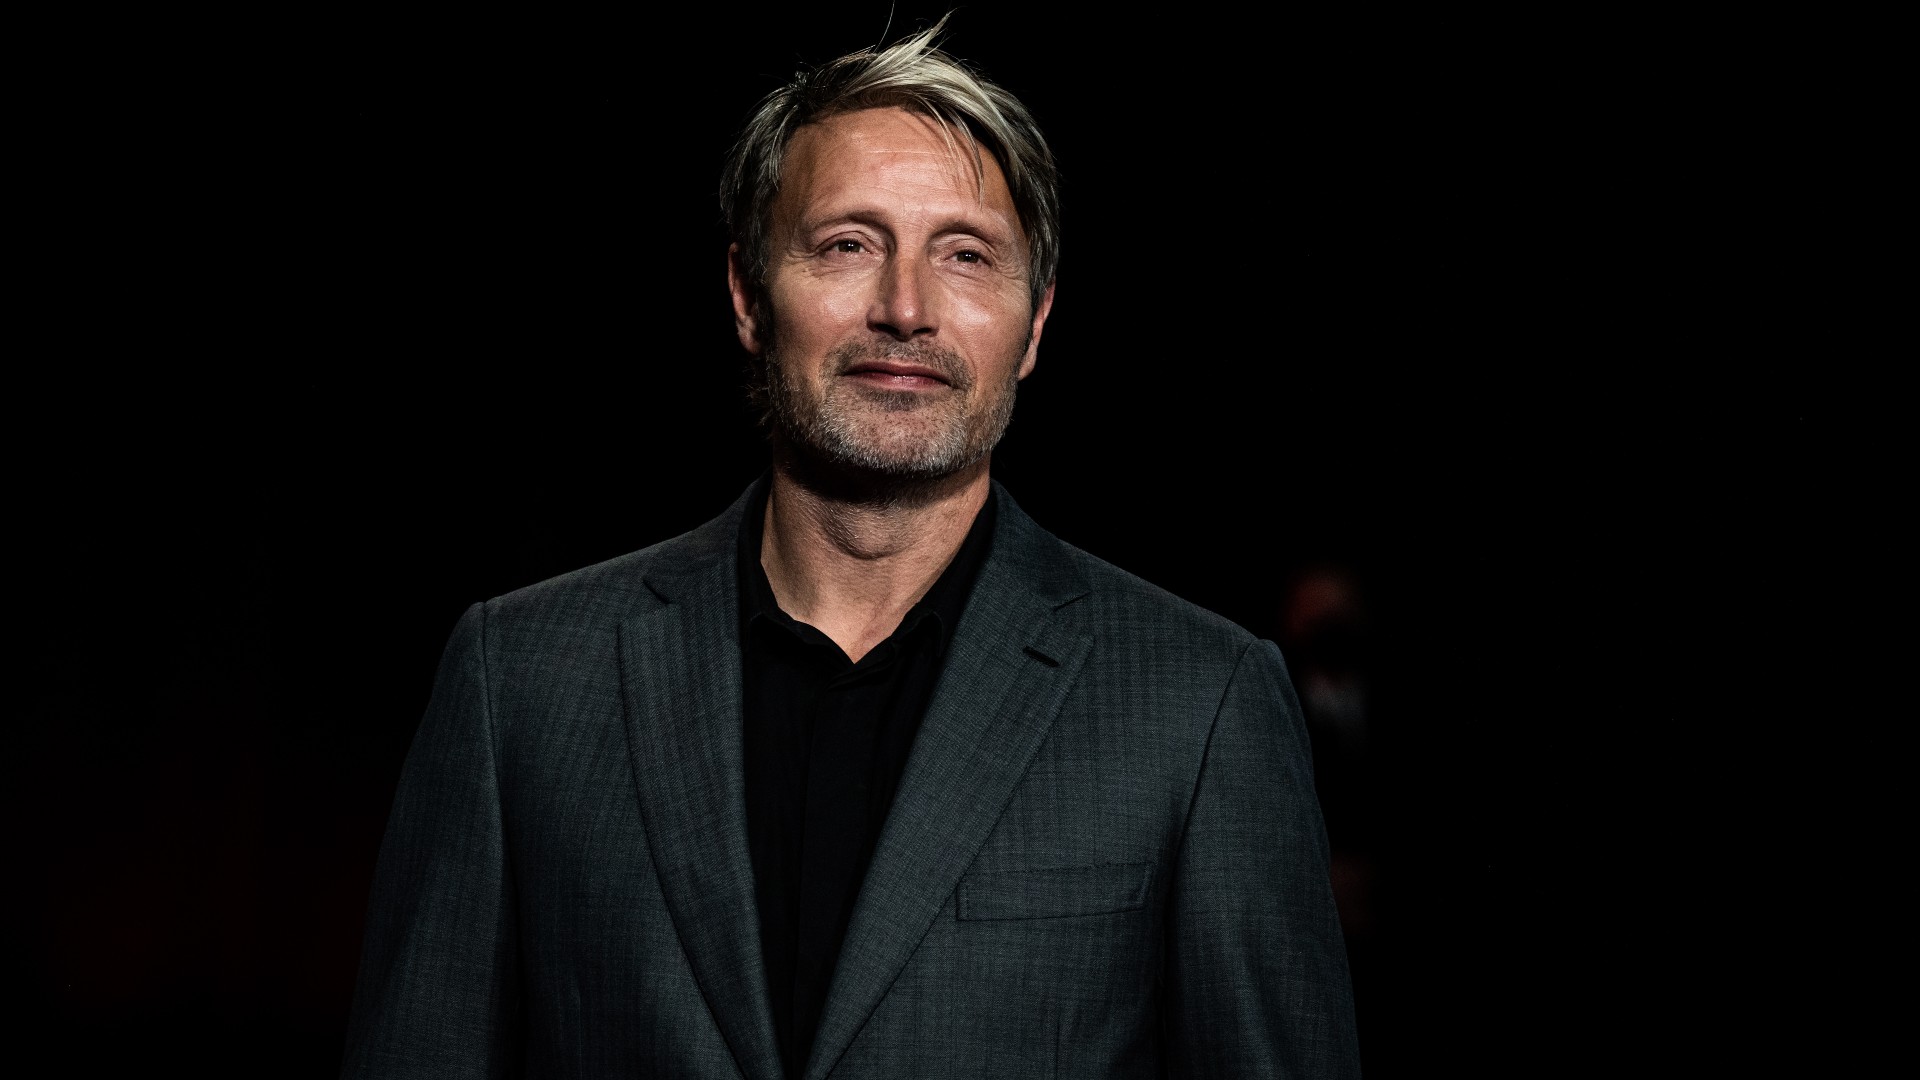 Casting News: Mads Mikkelsen to Star in Danish Historical Movie 'The King's Land'